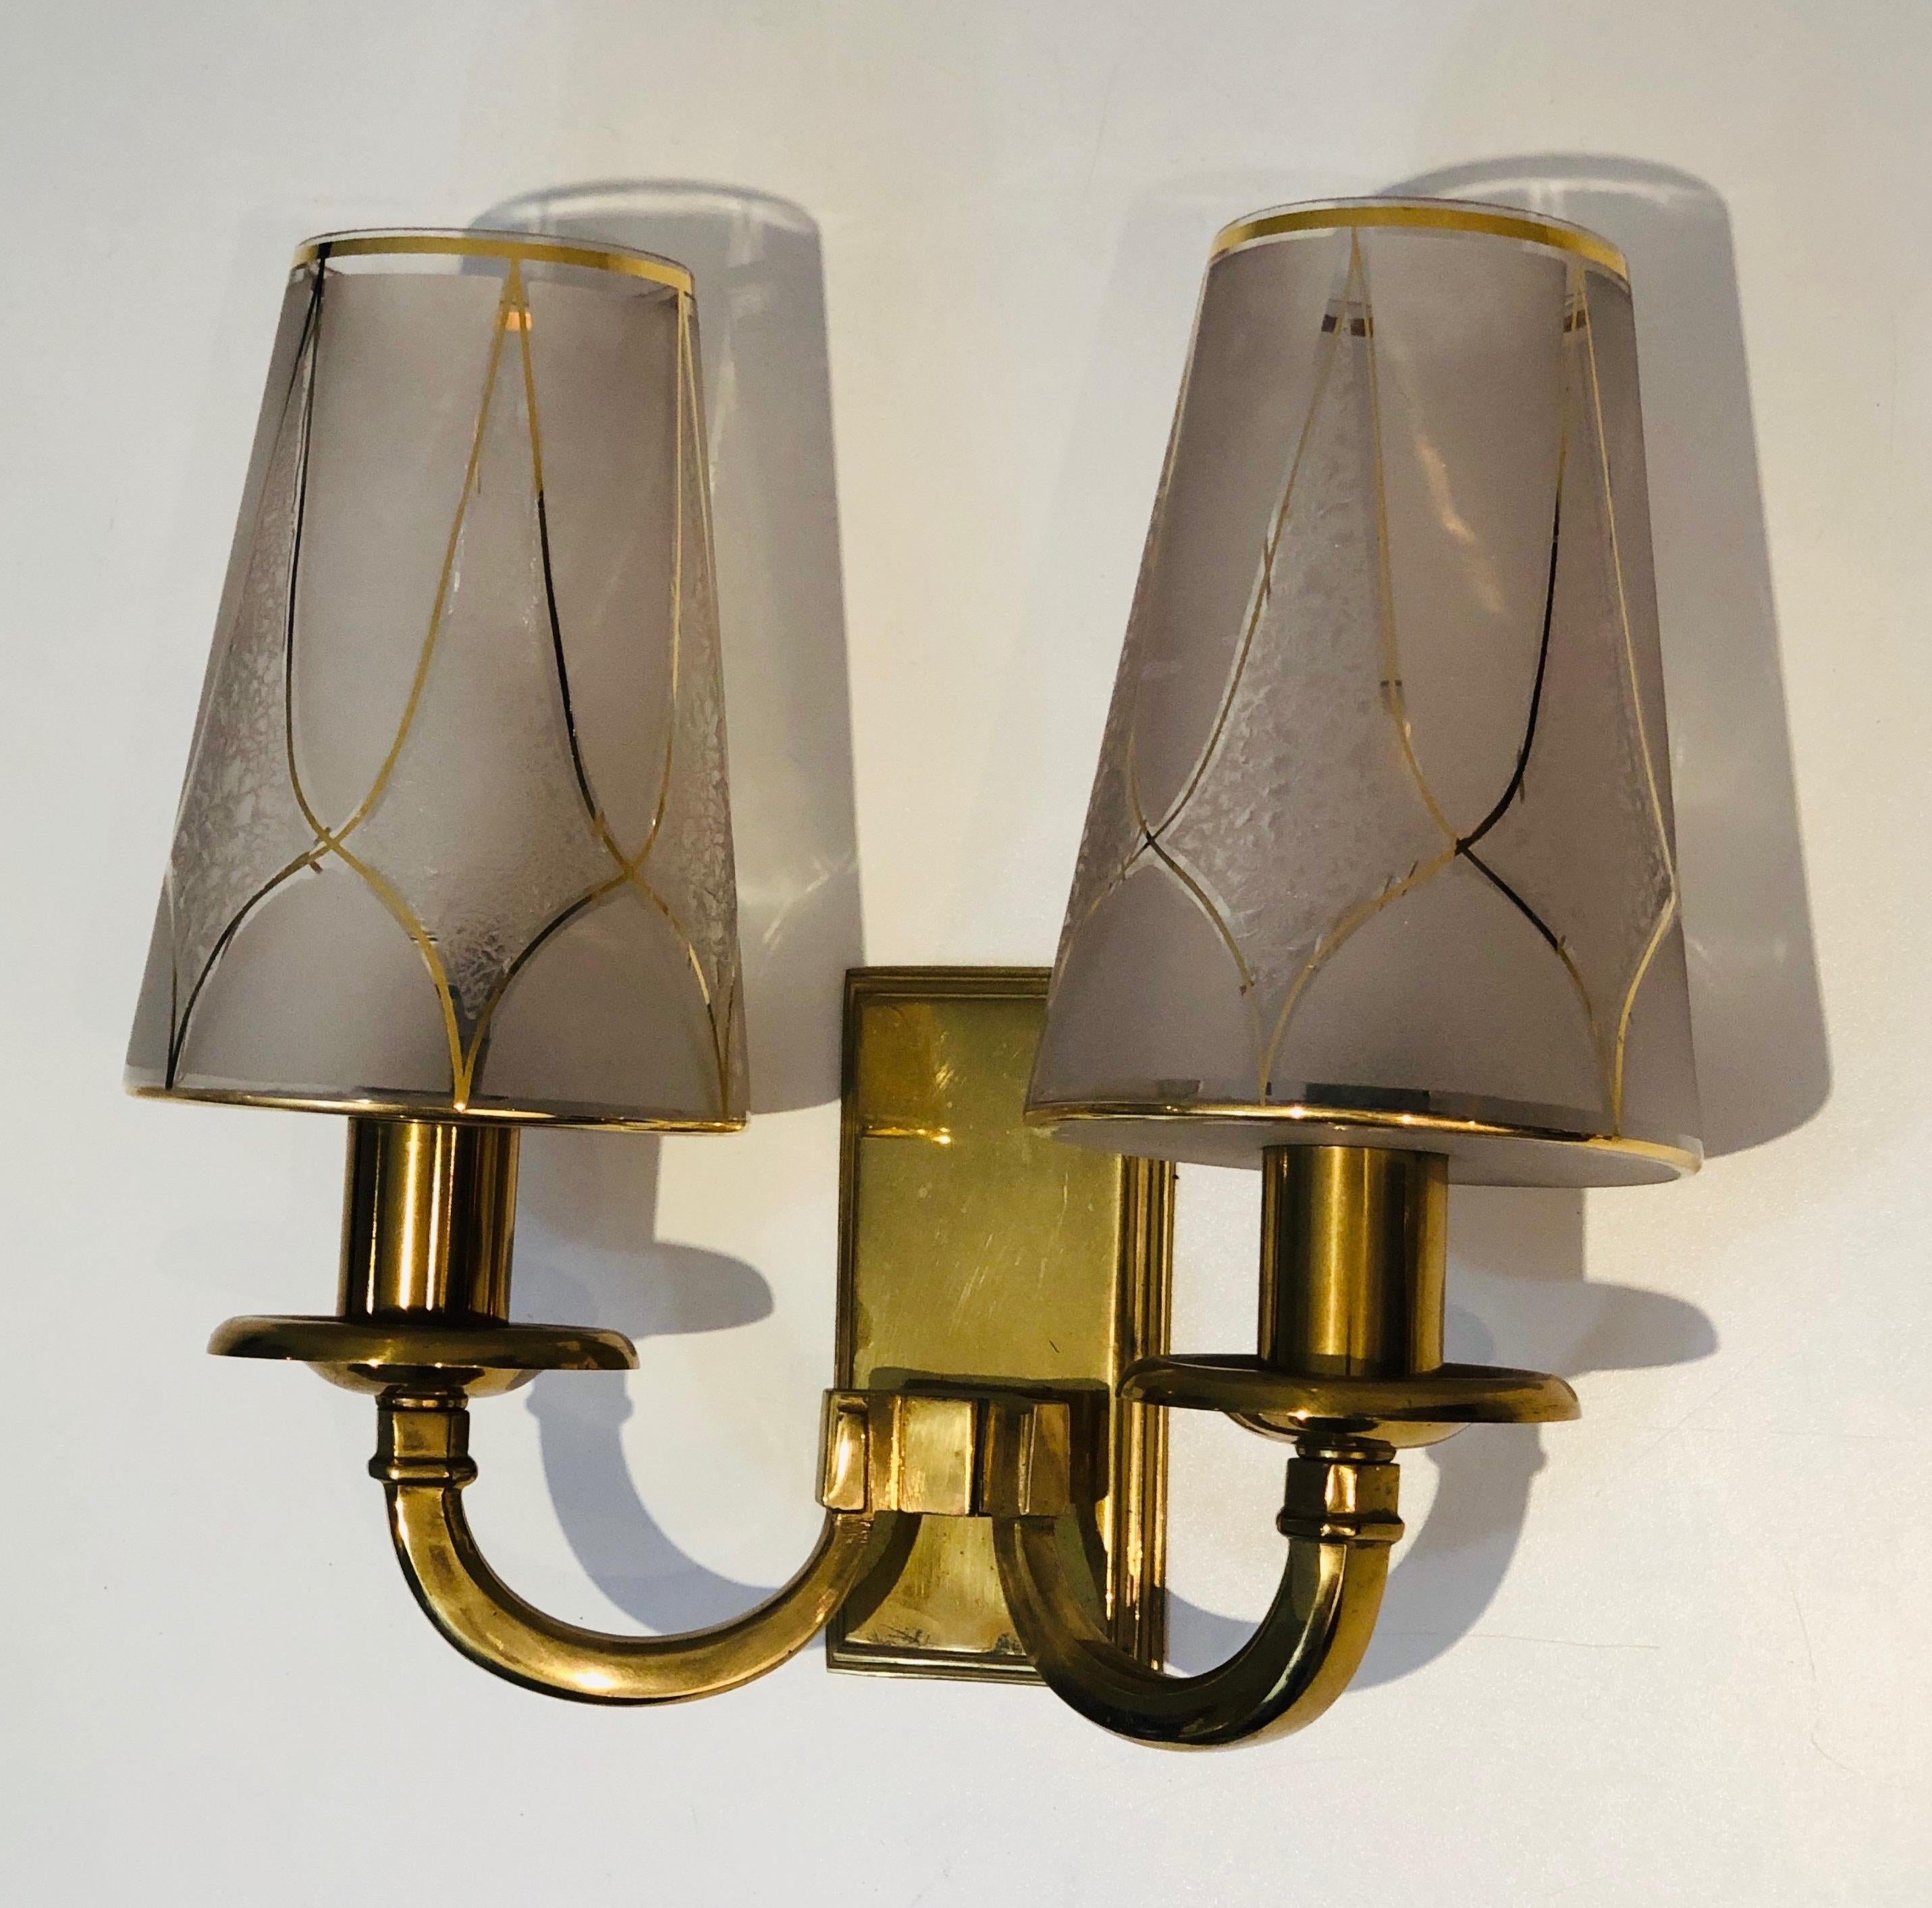 Art Nouveau Pair of Art Deco Brass Wall Lights, French Work in the Style of Perzel, 1900's For Sale